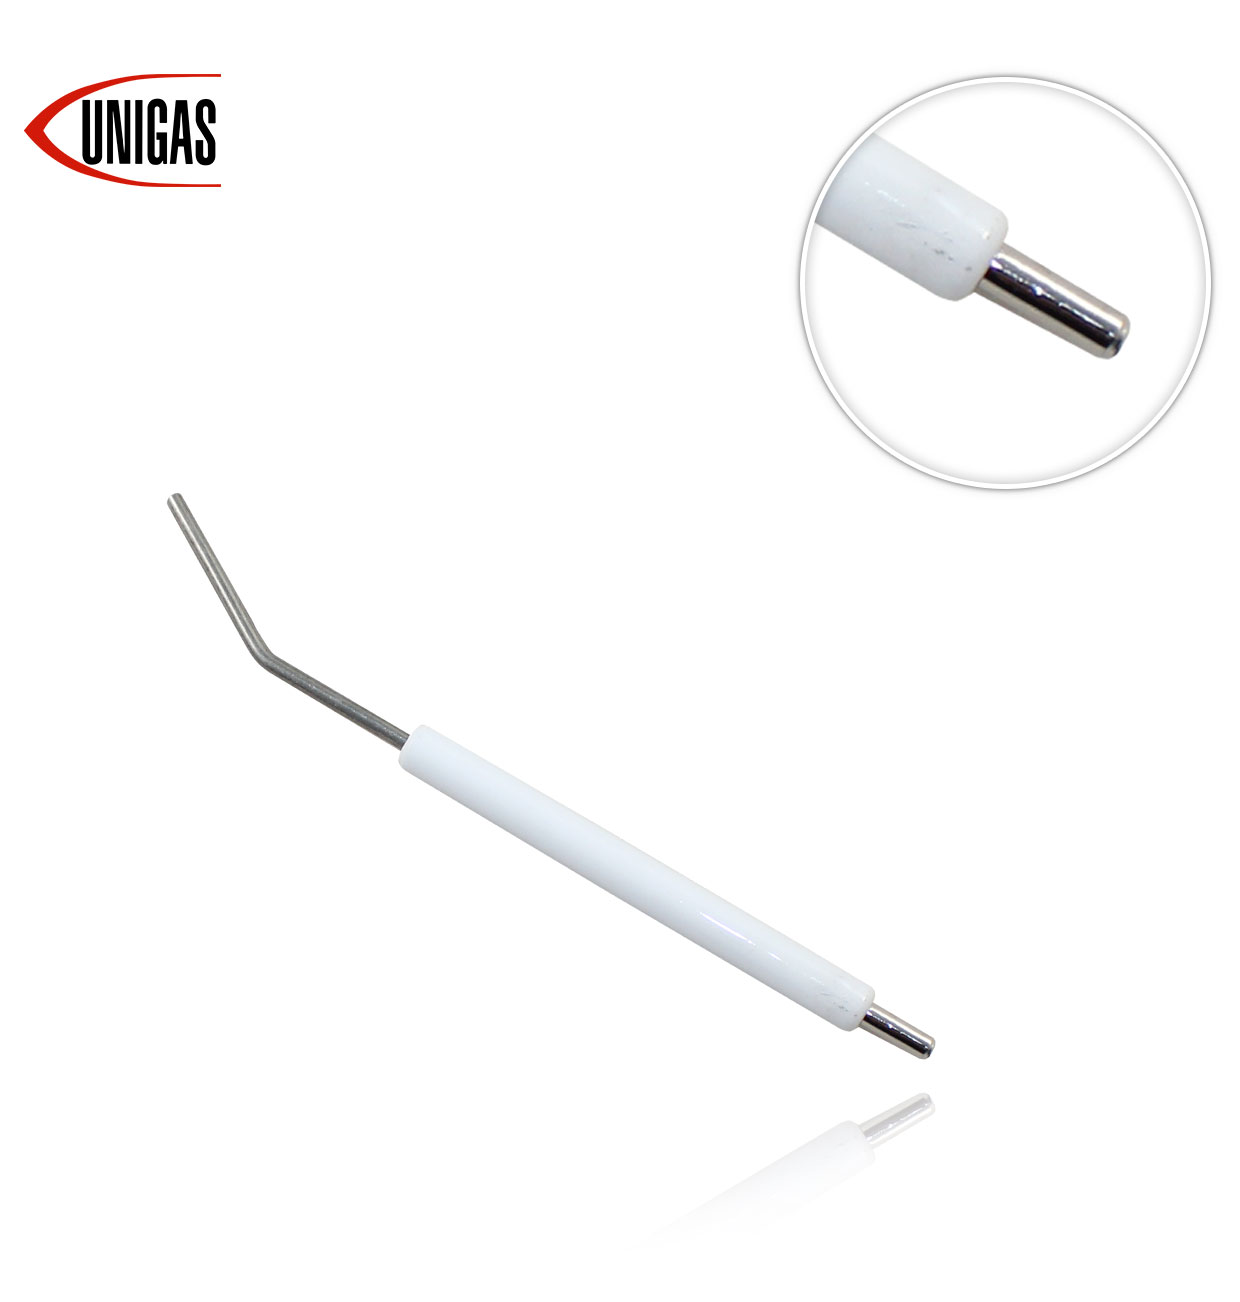 2080108 S3-18 NG140-550 UNIGAS IONISATION ELECTRODE